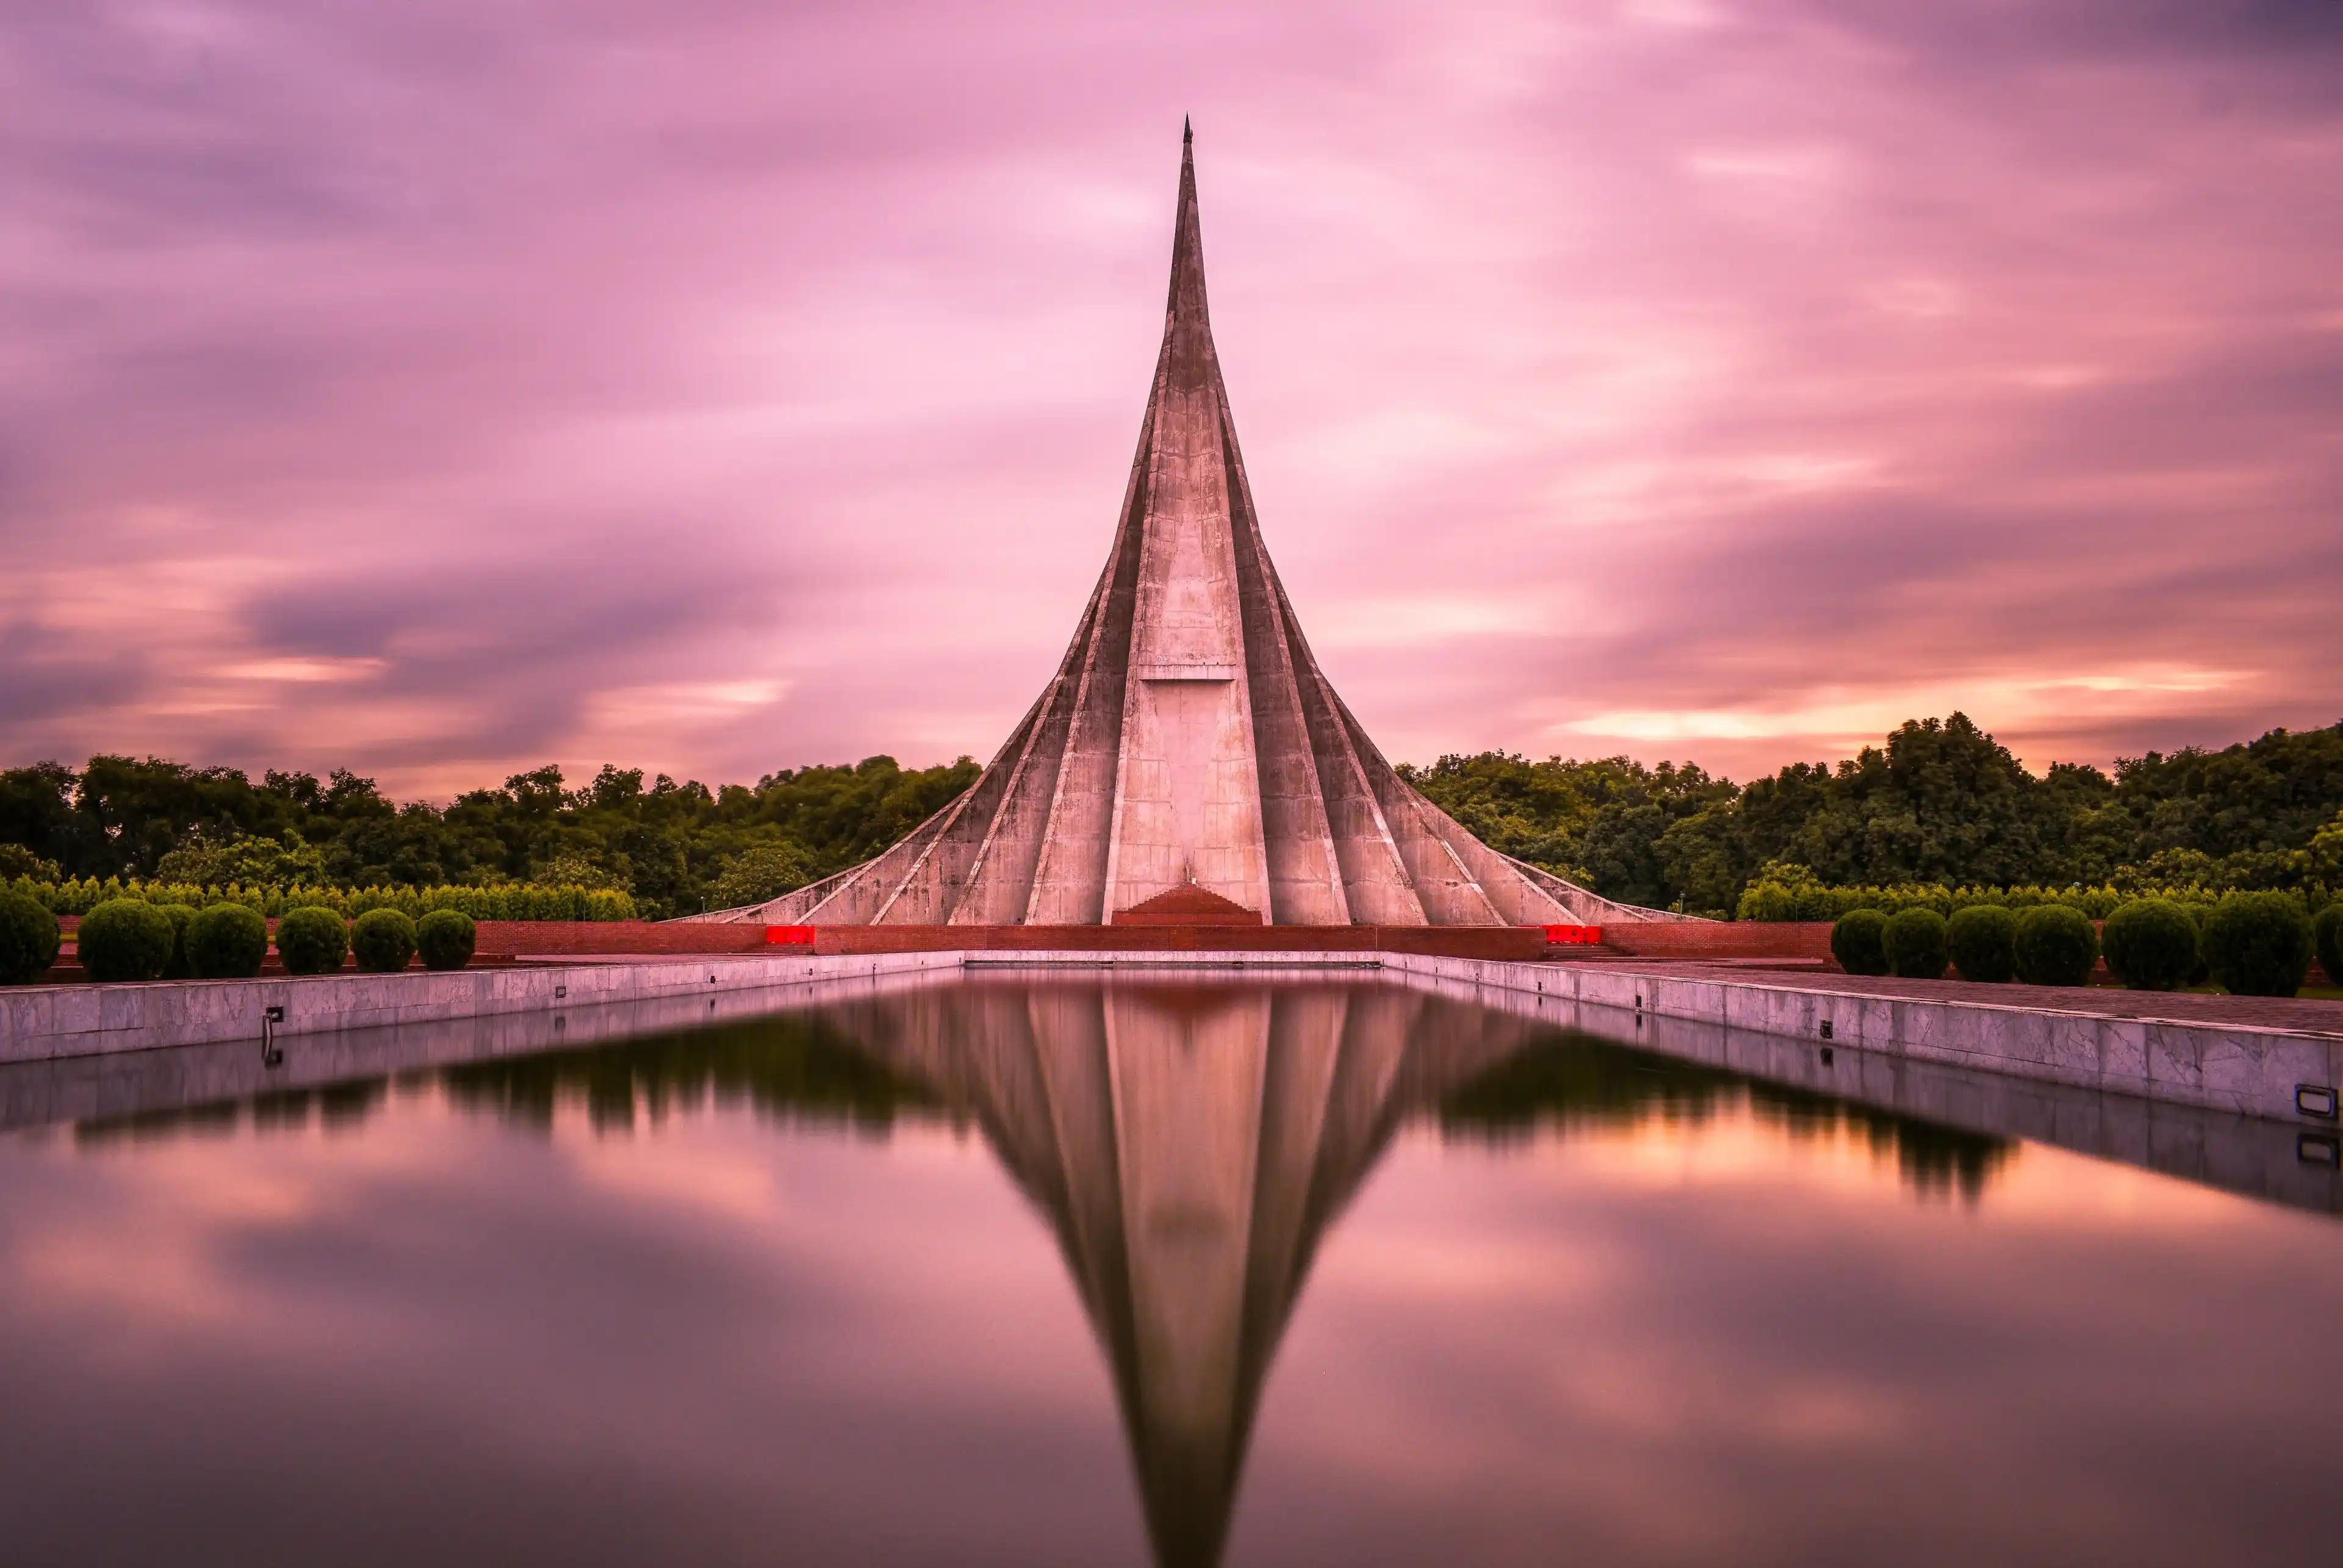 The National Martyrs' Memorial is the national monument of Bangladesh, built to honour and remember those who died during the War of Liberation.